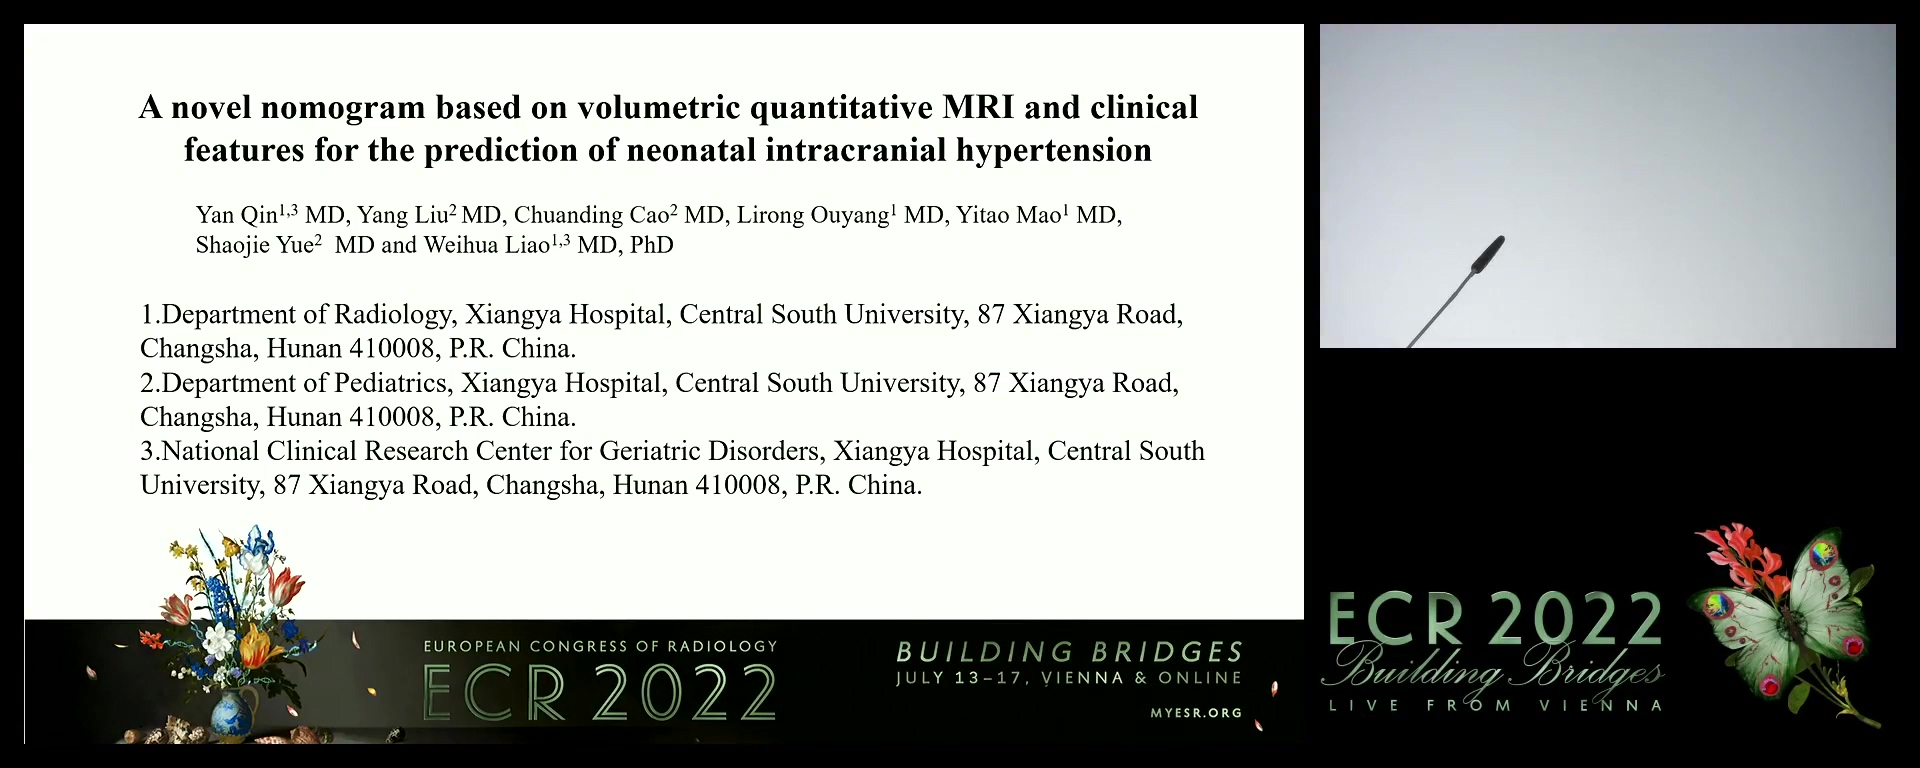 A novel nomogram based on volumetric quantitative MRI and clinical features for the prediction of neonatal intracranial hypertension - Yan Qin, Changsha / CN